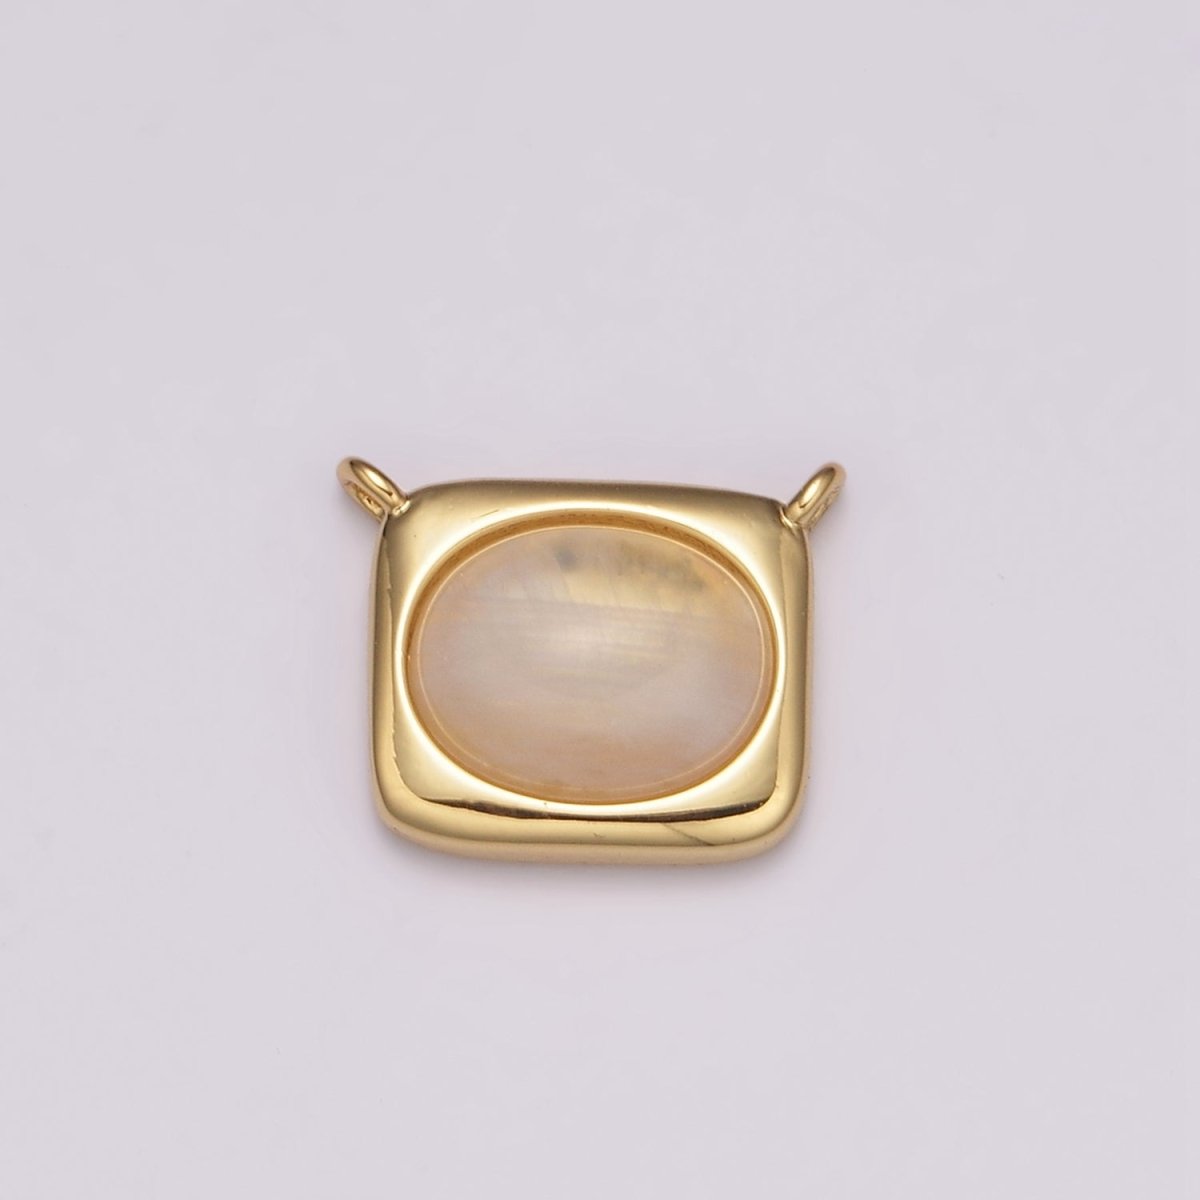 Mini 24K Gold Filled Rose Quartz Gem Stone charm Connector for Minimalist Jewelry Making Necklace Supply N-092 - DLUXCA